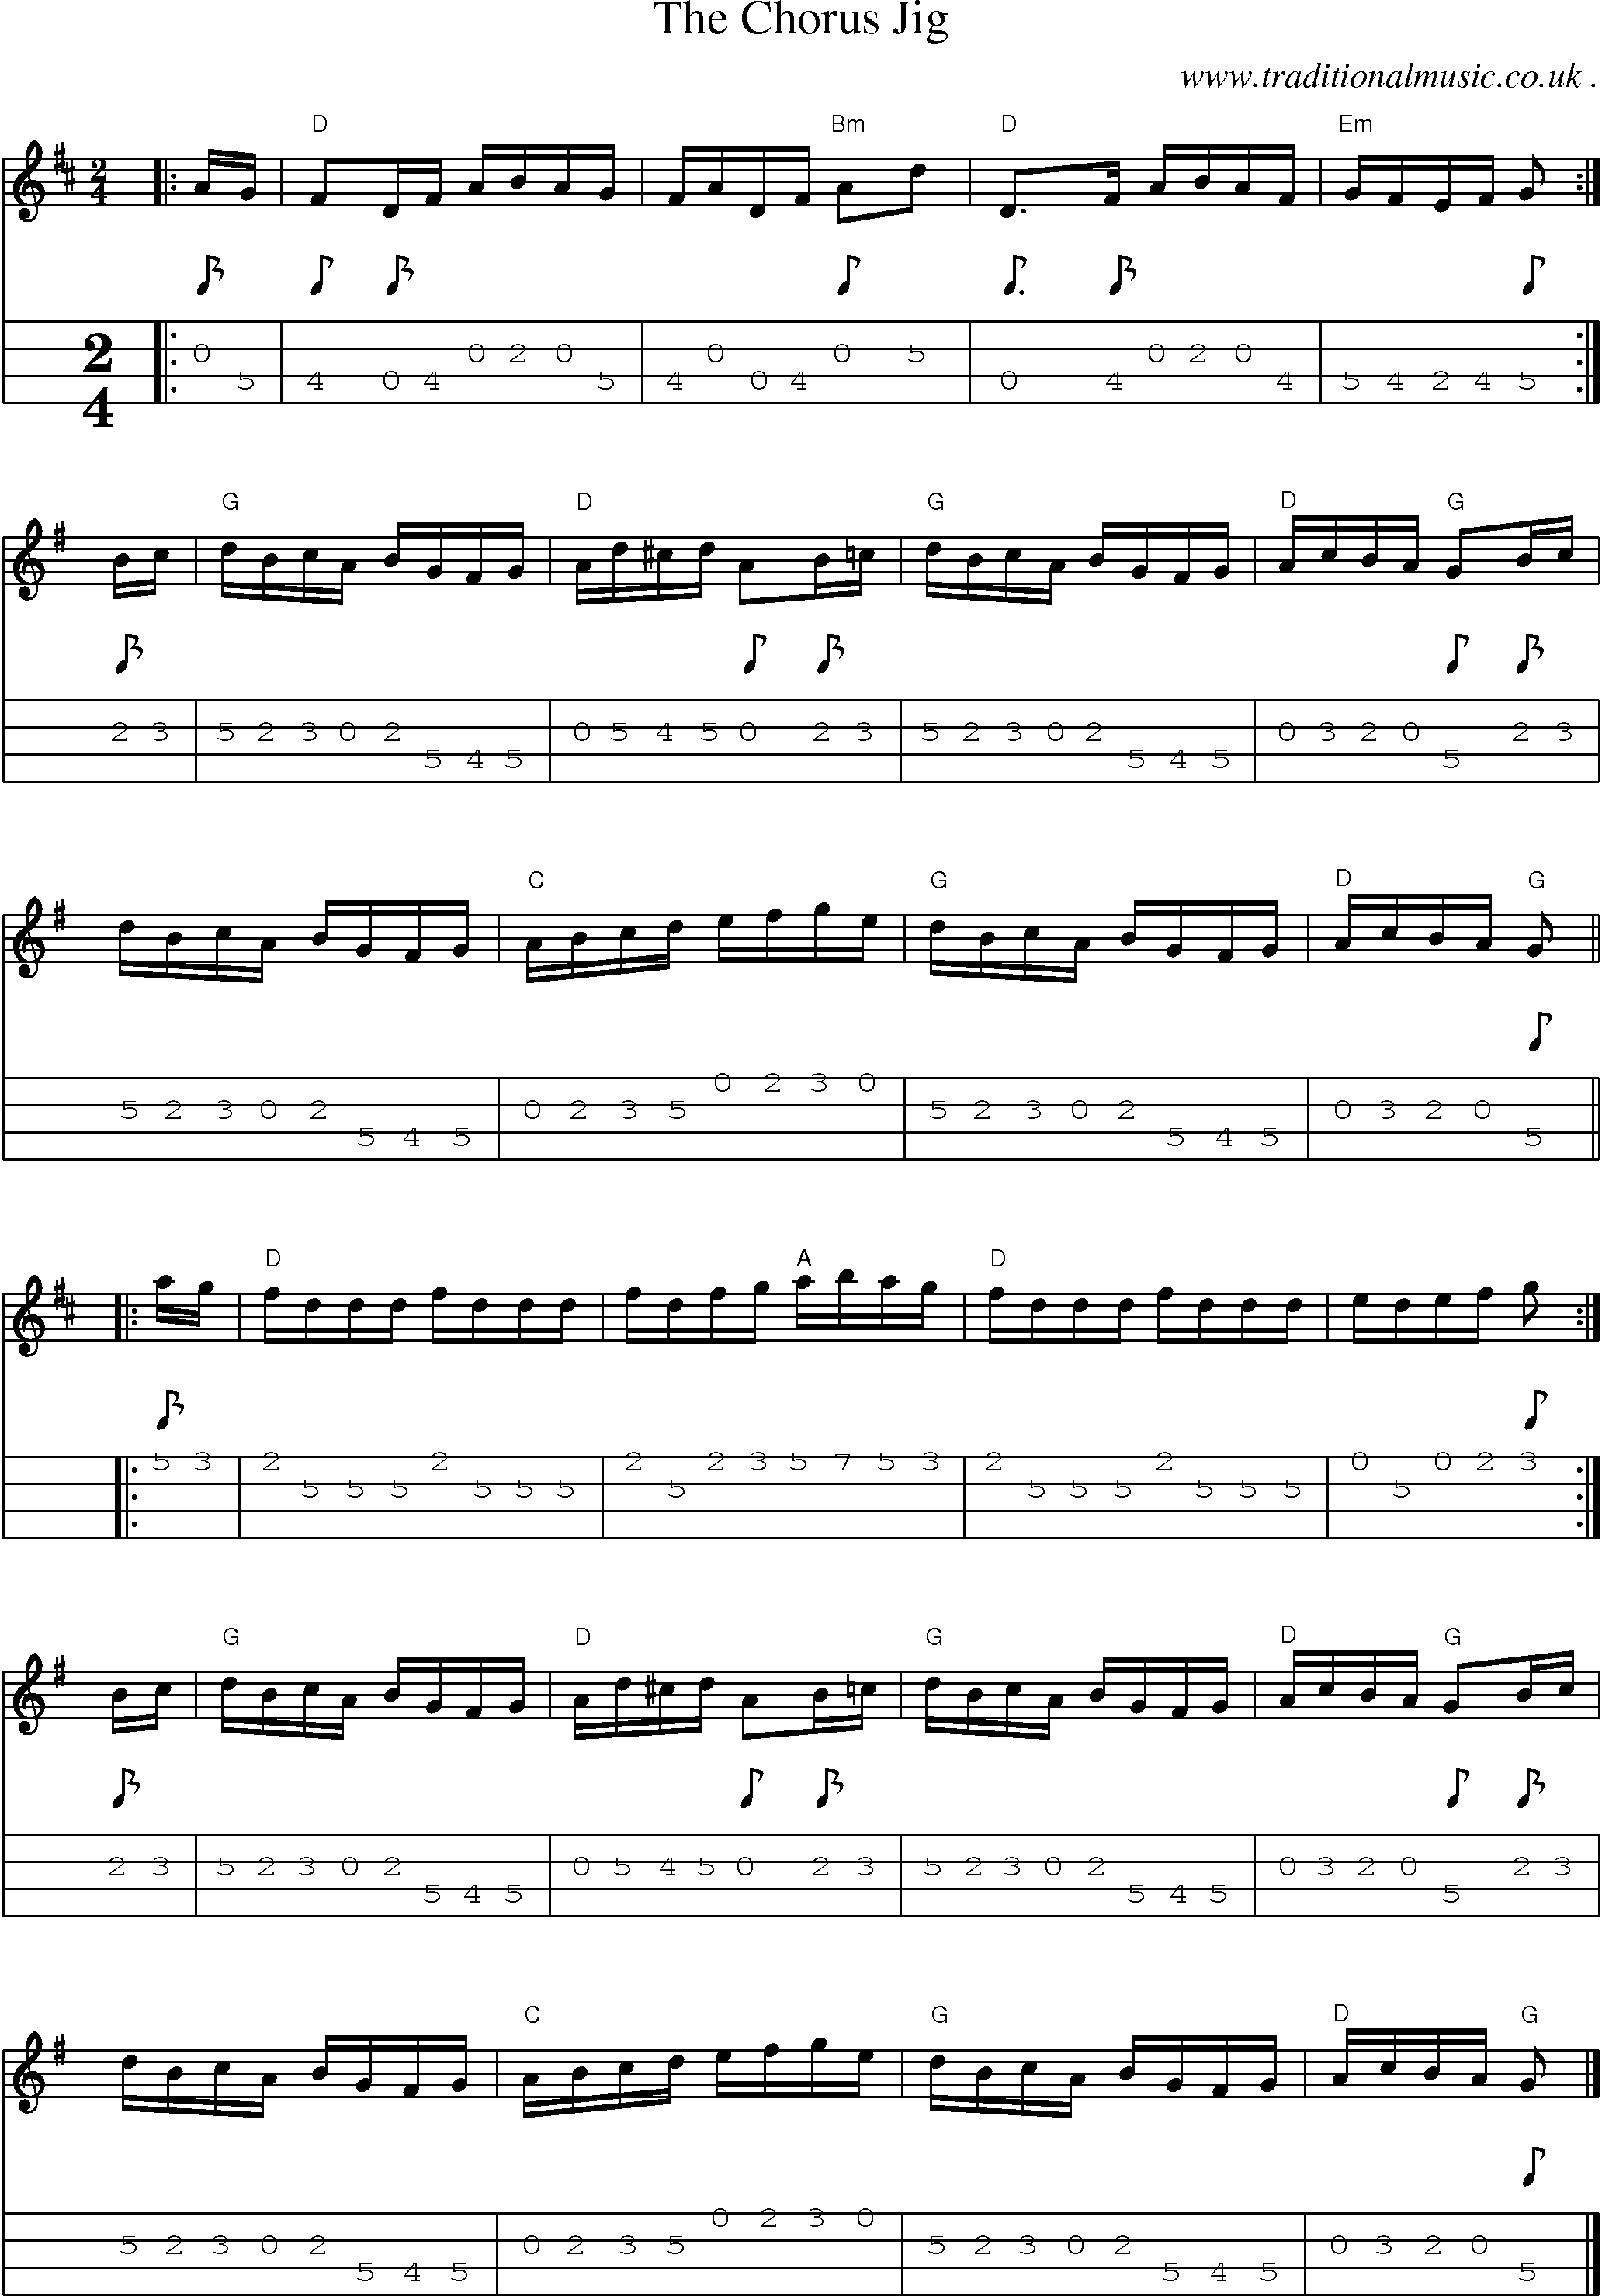 Music Score and Guitar Tabs for The Chorus Jig